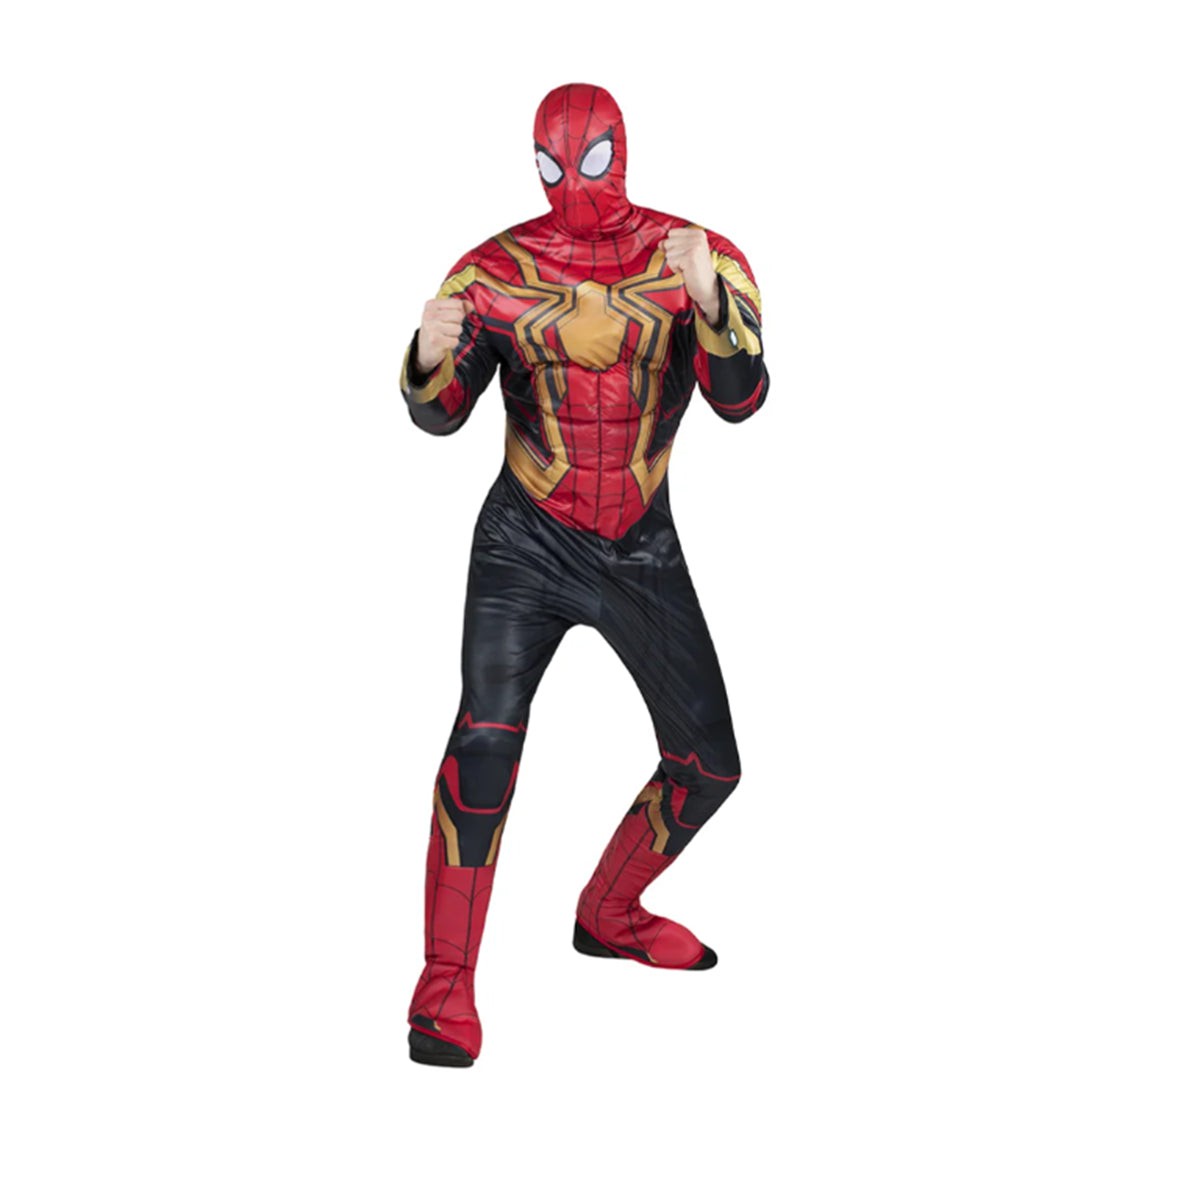 Marvel Spider-Man No Way Home Spider-Man Costume for Adults, Padded Jumpsuit